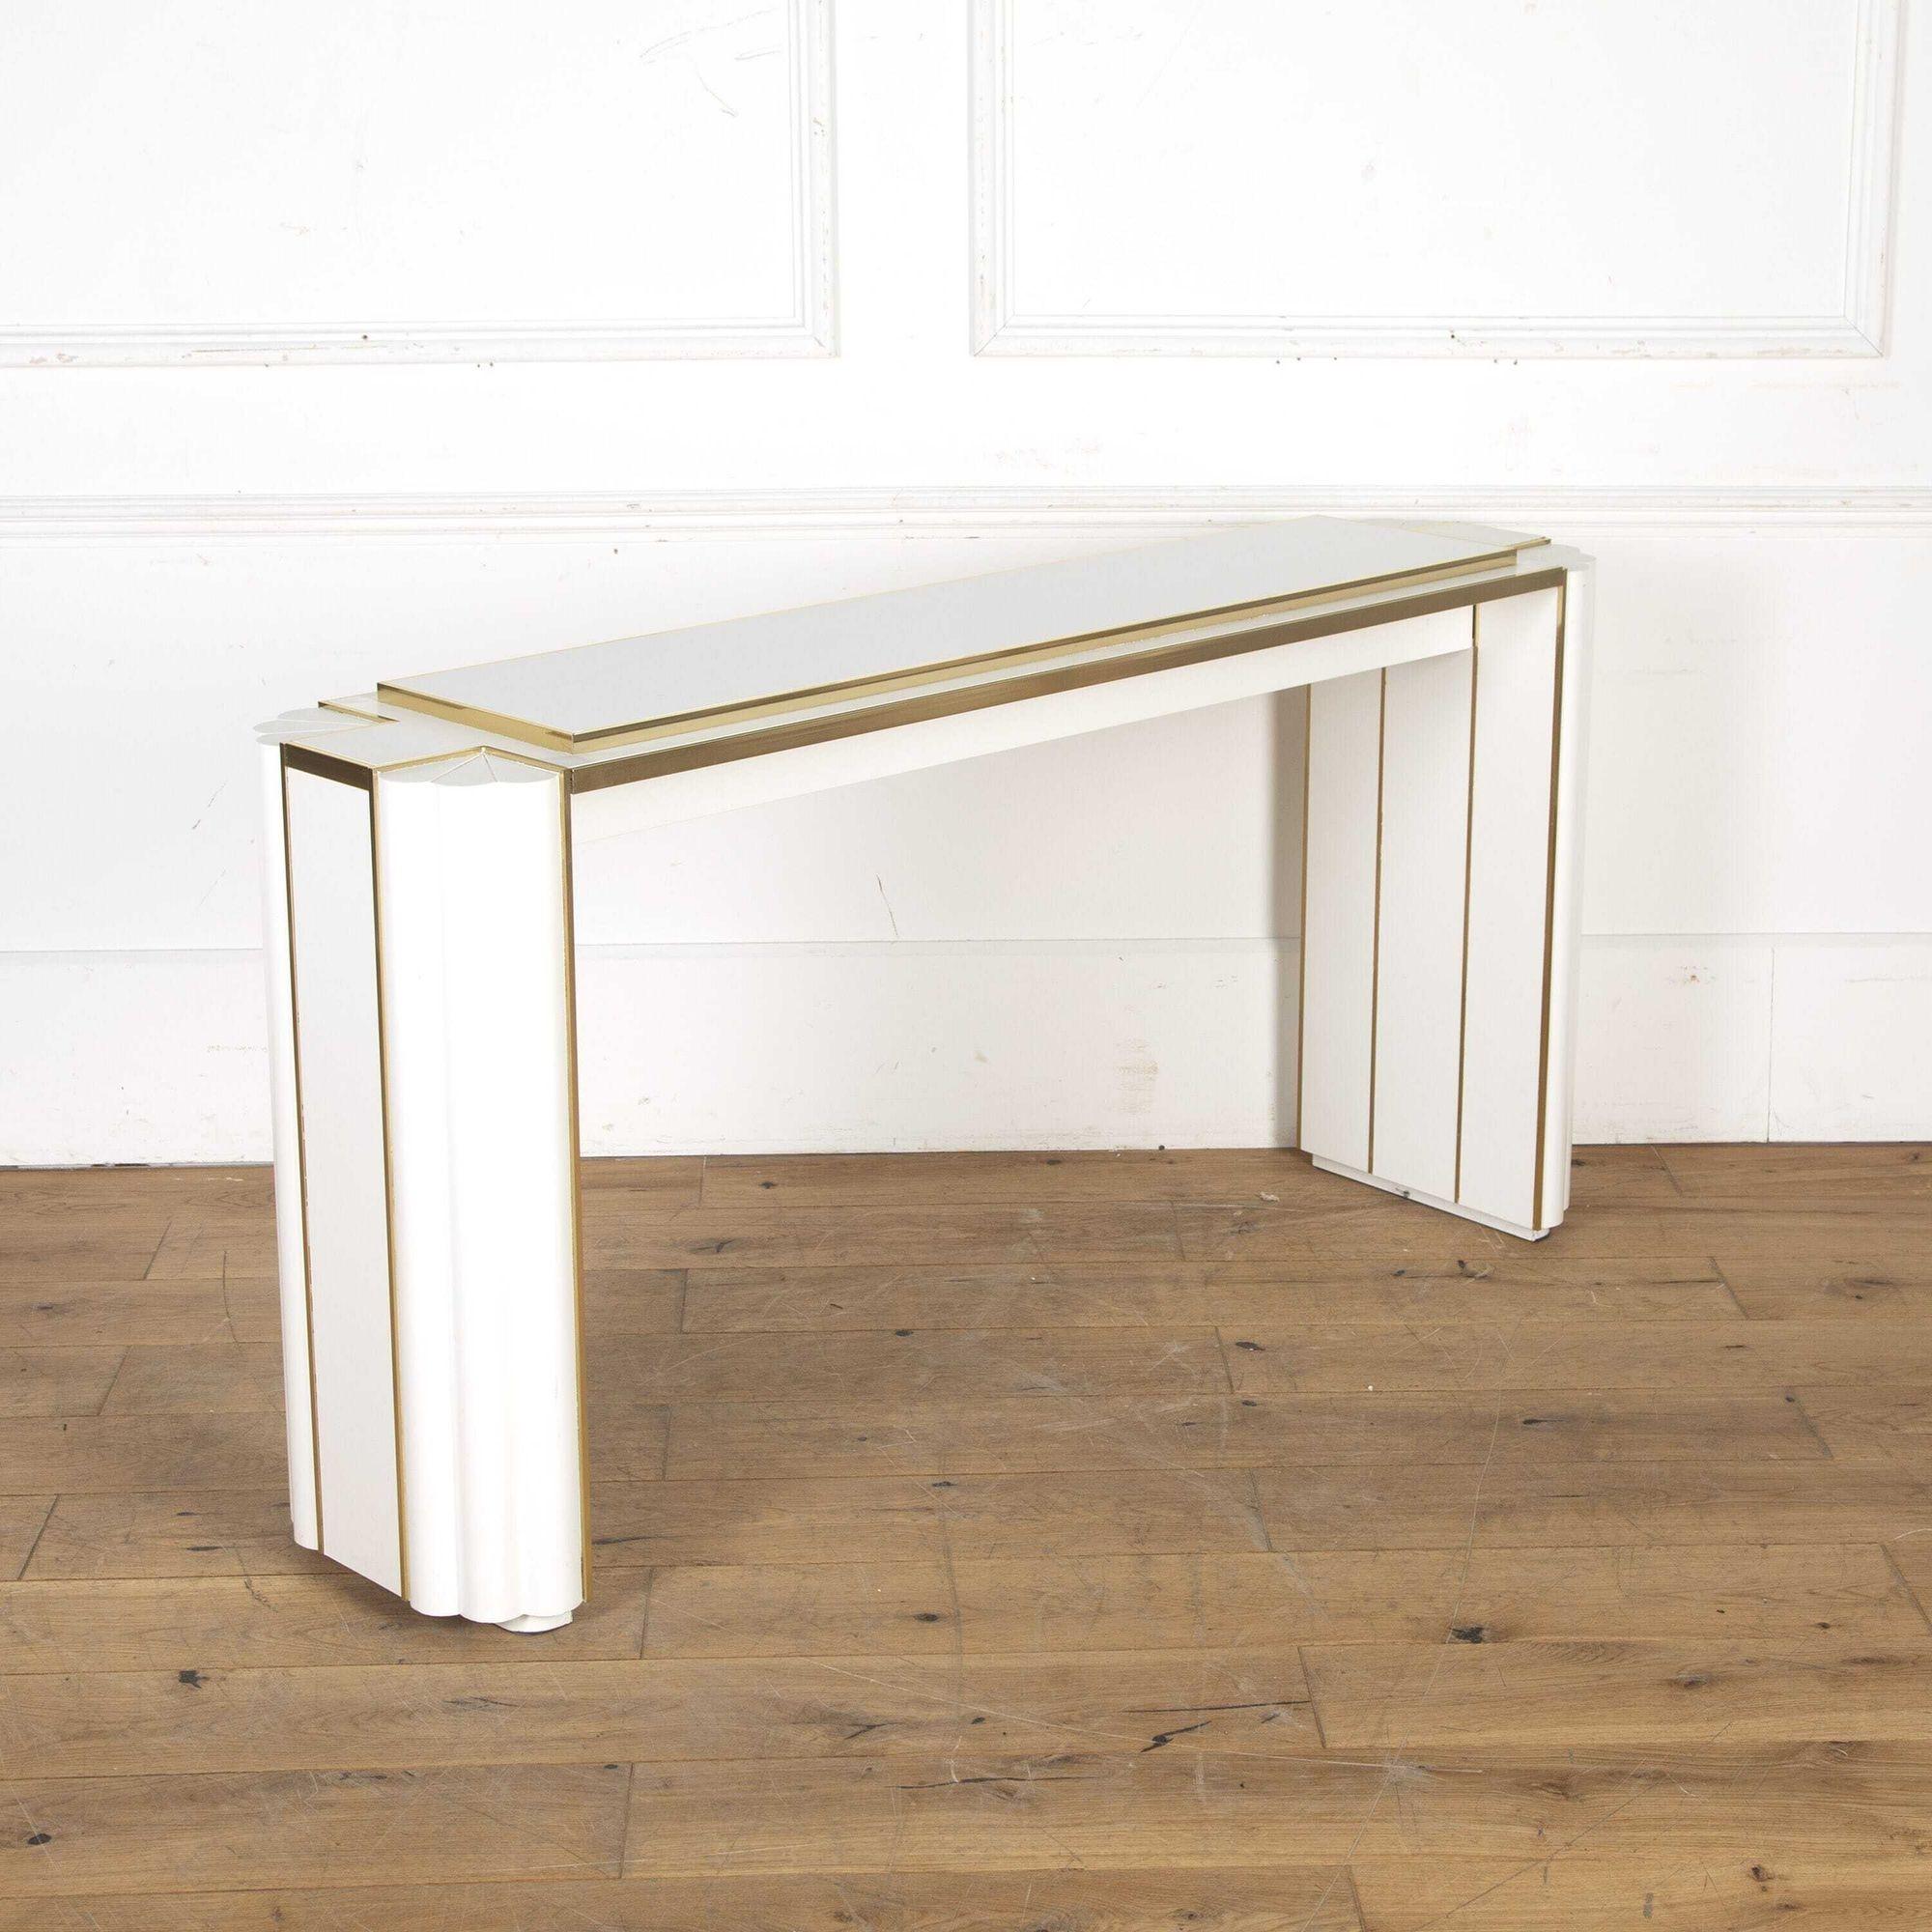 1980's Alain Delon Console Table In Good Condition For Sale In Gloucestershire, GB